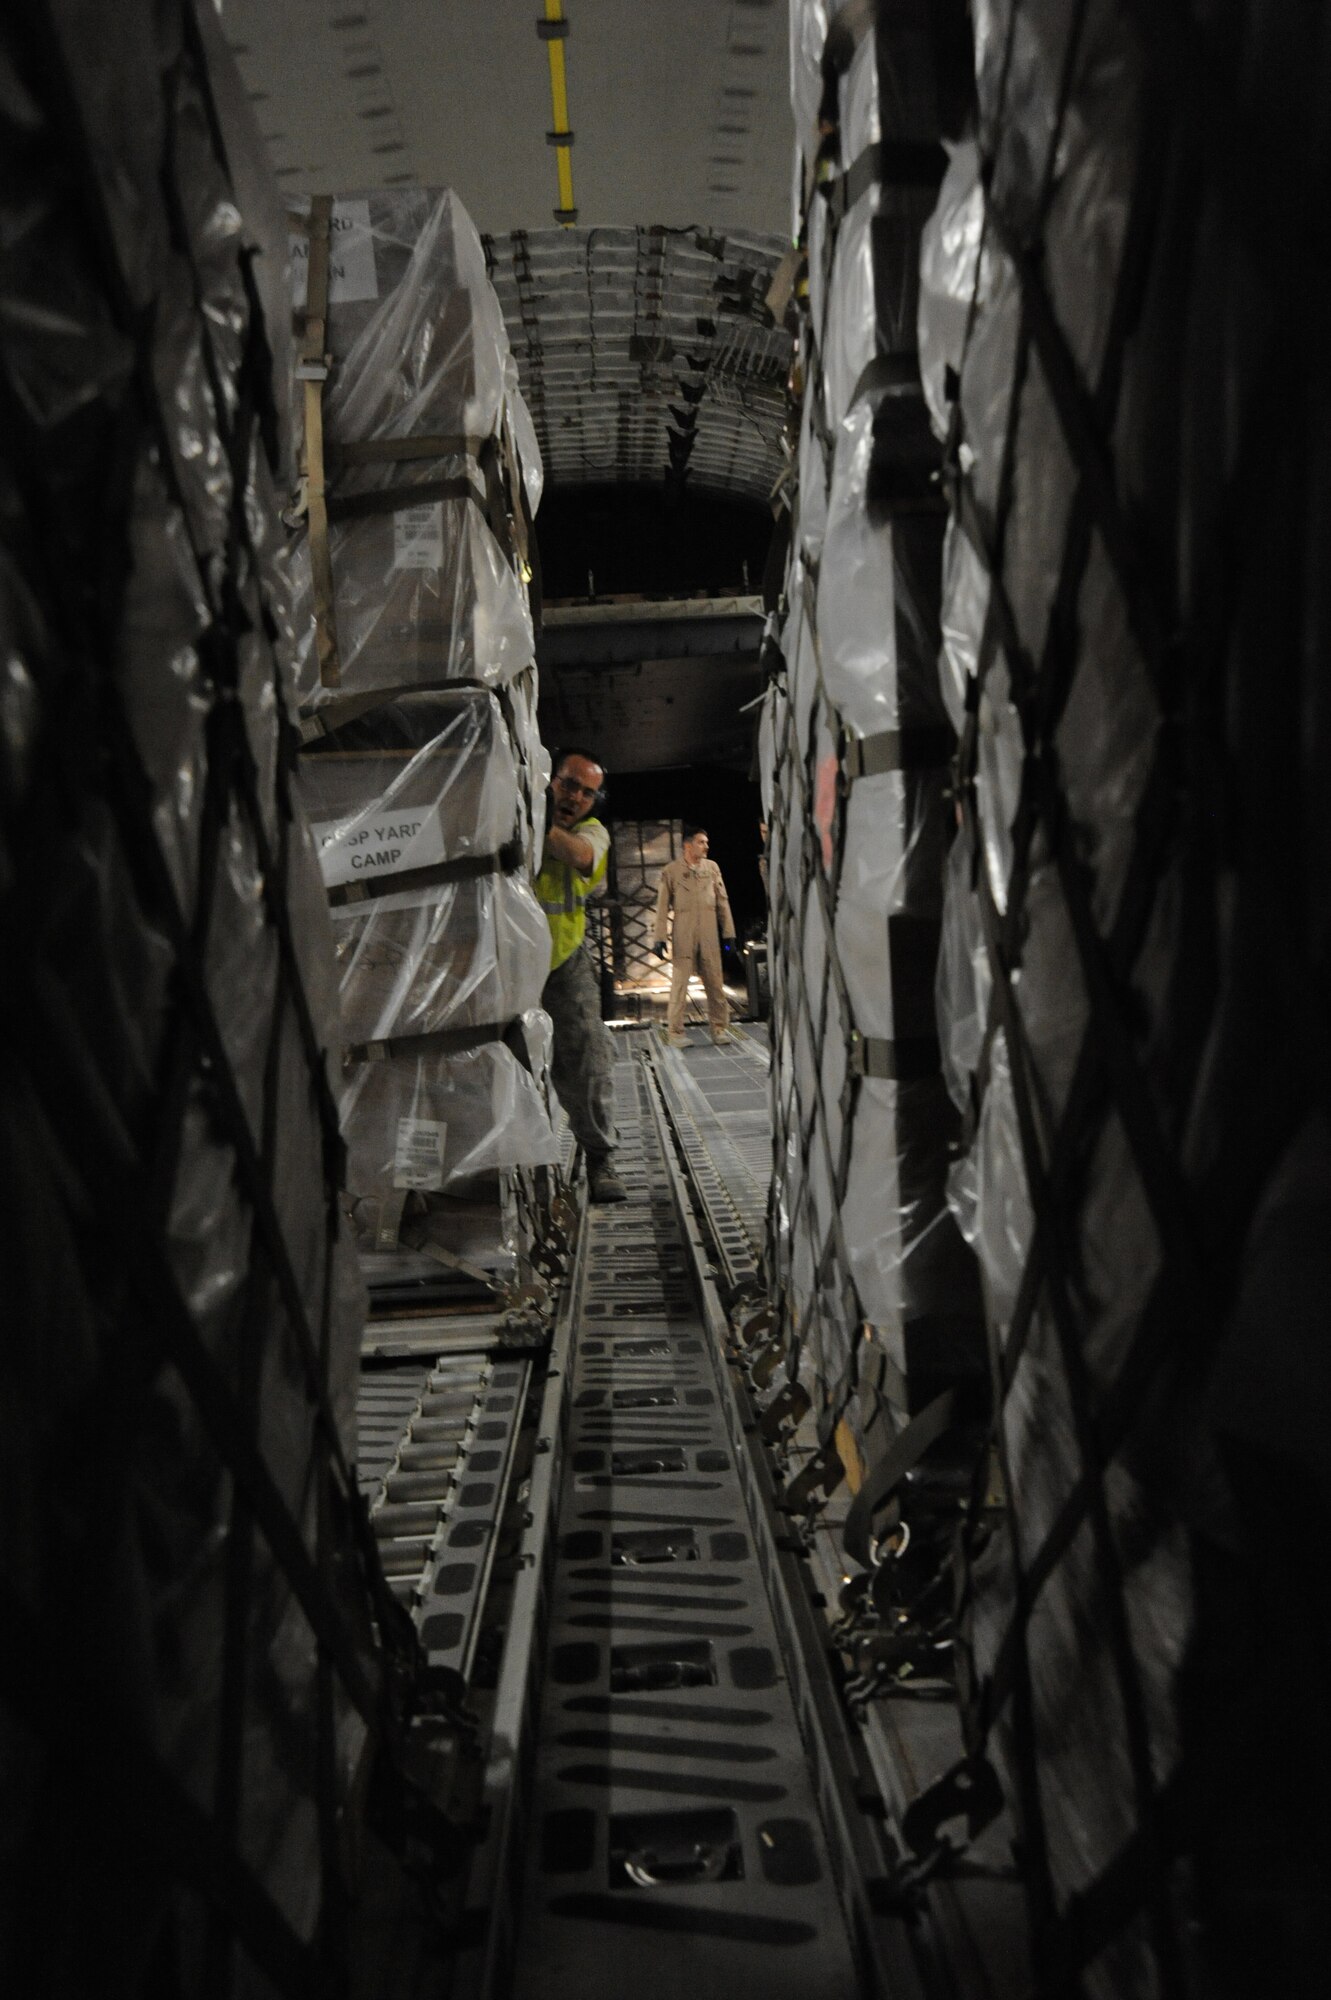 Airman from the 386th Expeditionary Logistics Readiness Squadron and Air Mobility Command work together to load pallets of non-lethal aid on to a C-17 aircraft at an undisclosed base in Southwest Asia Apr 30, 2013. (U.S. Air Force photo/Senior Master Sgt. George Thompson)